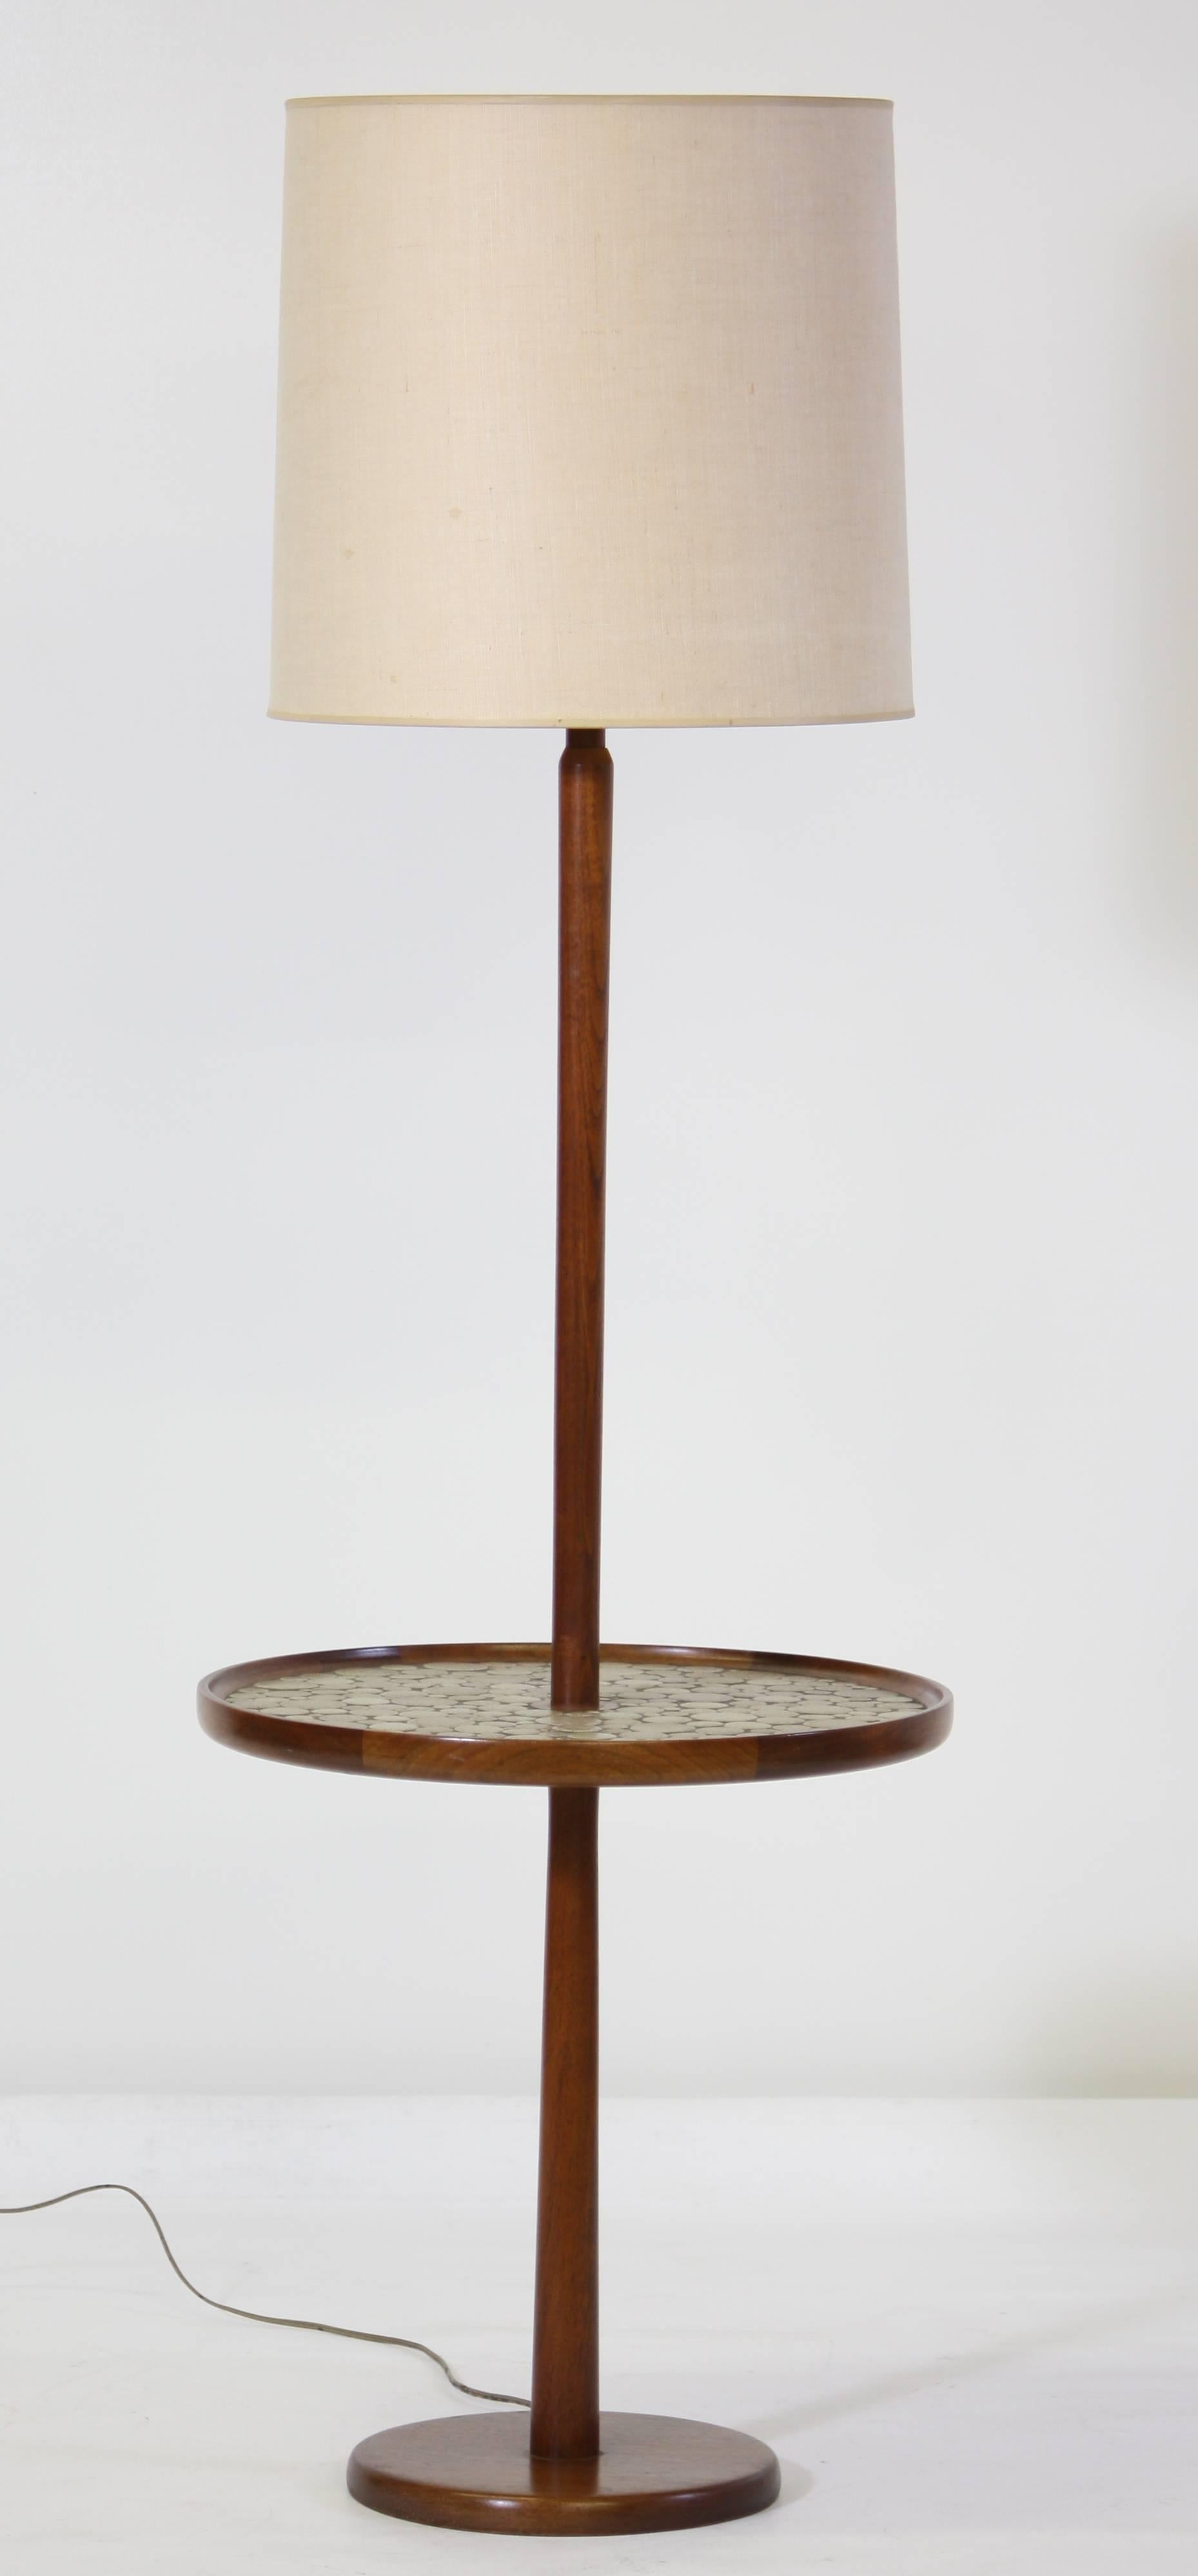 American Tile Top Table Lamp by Martz